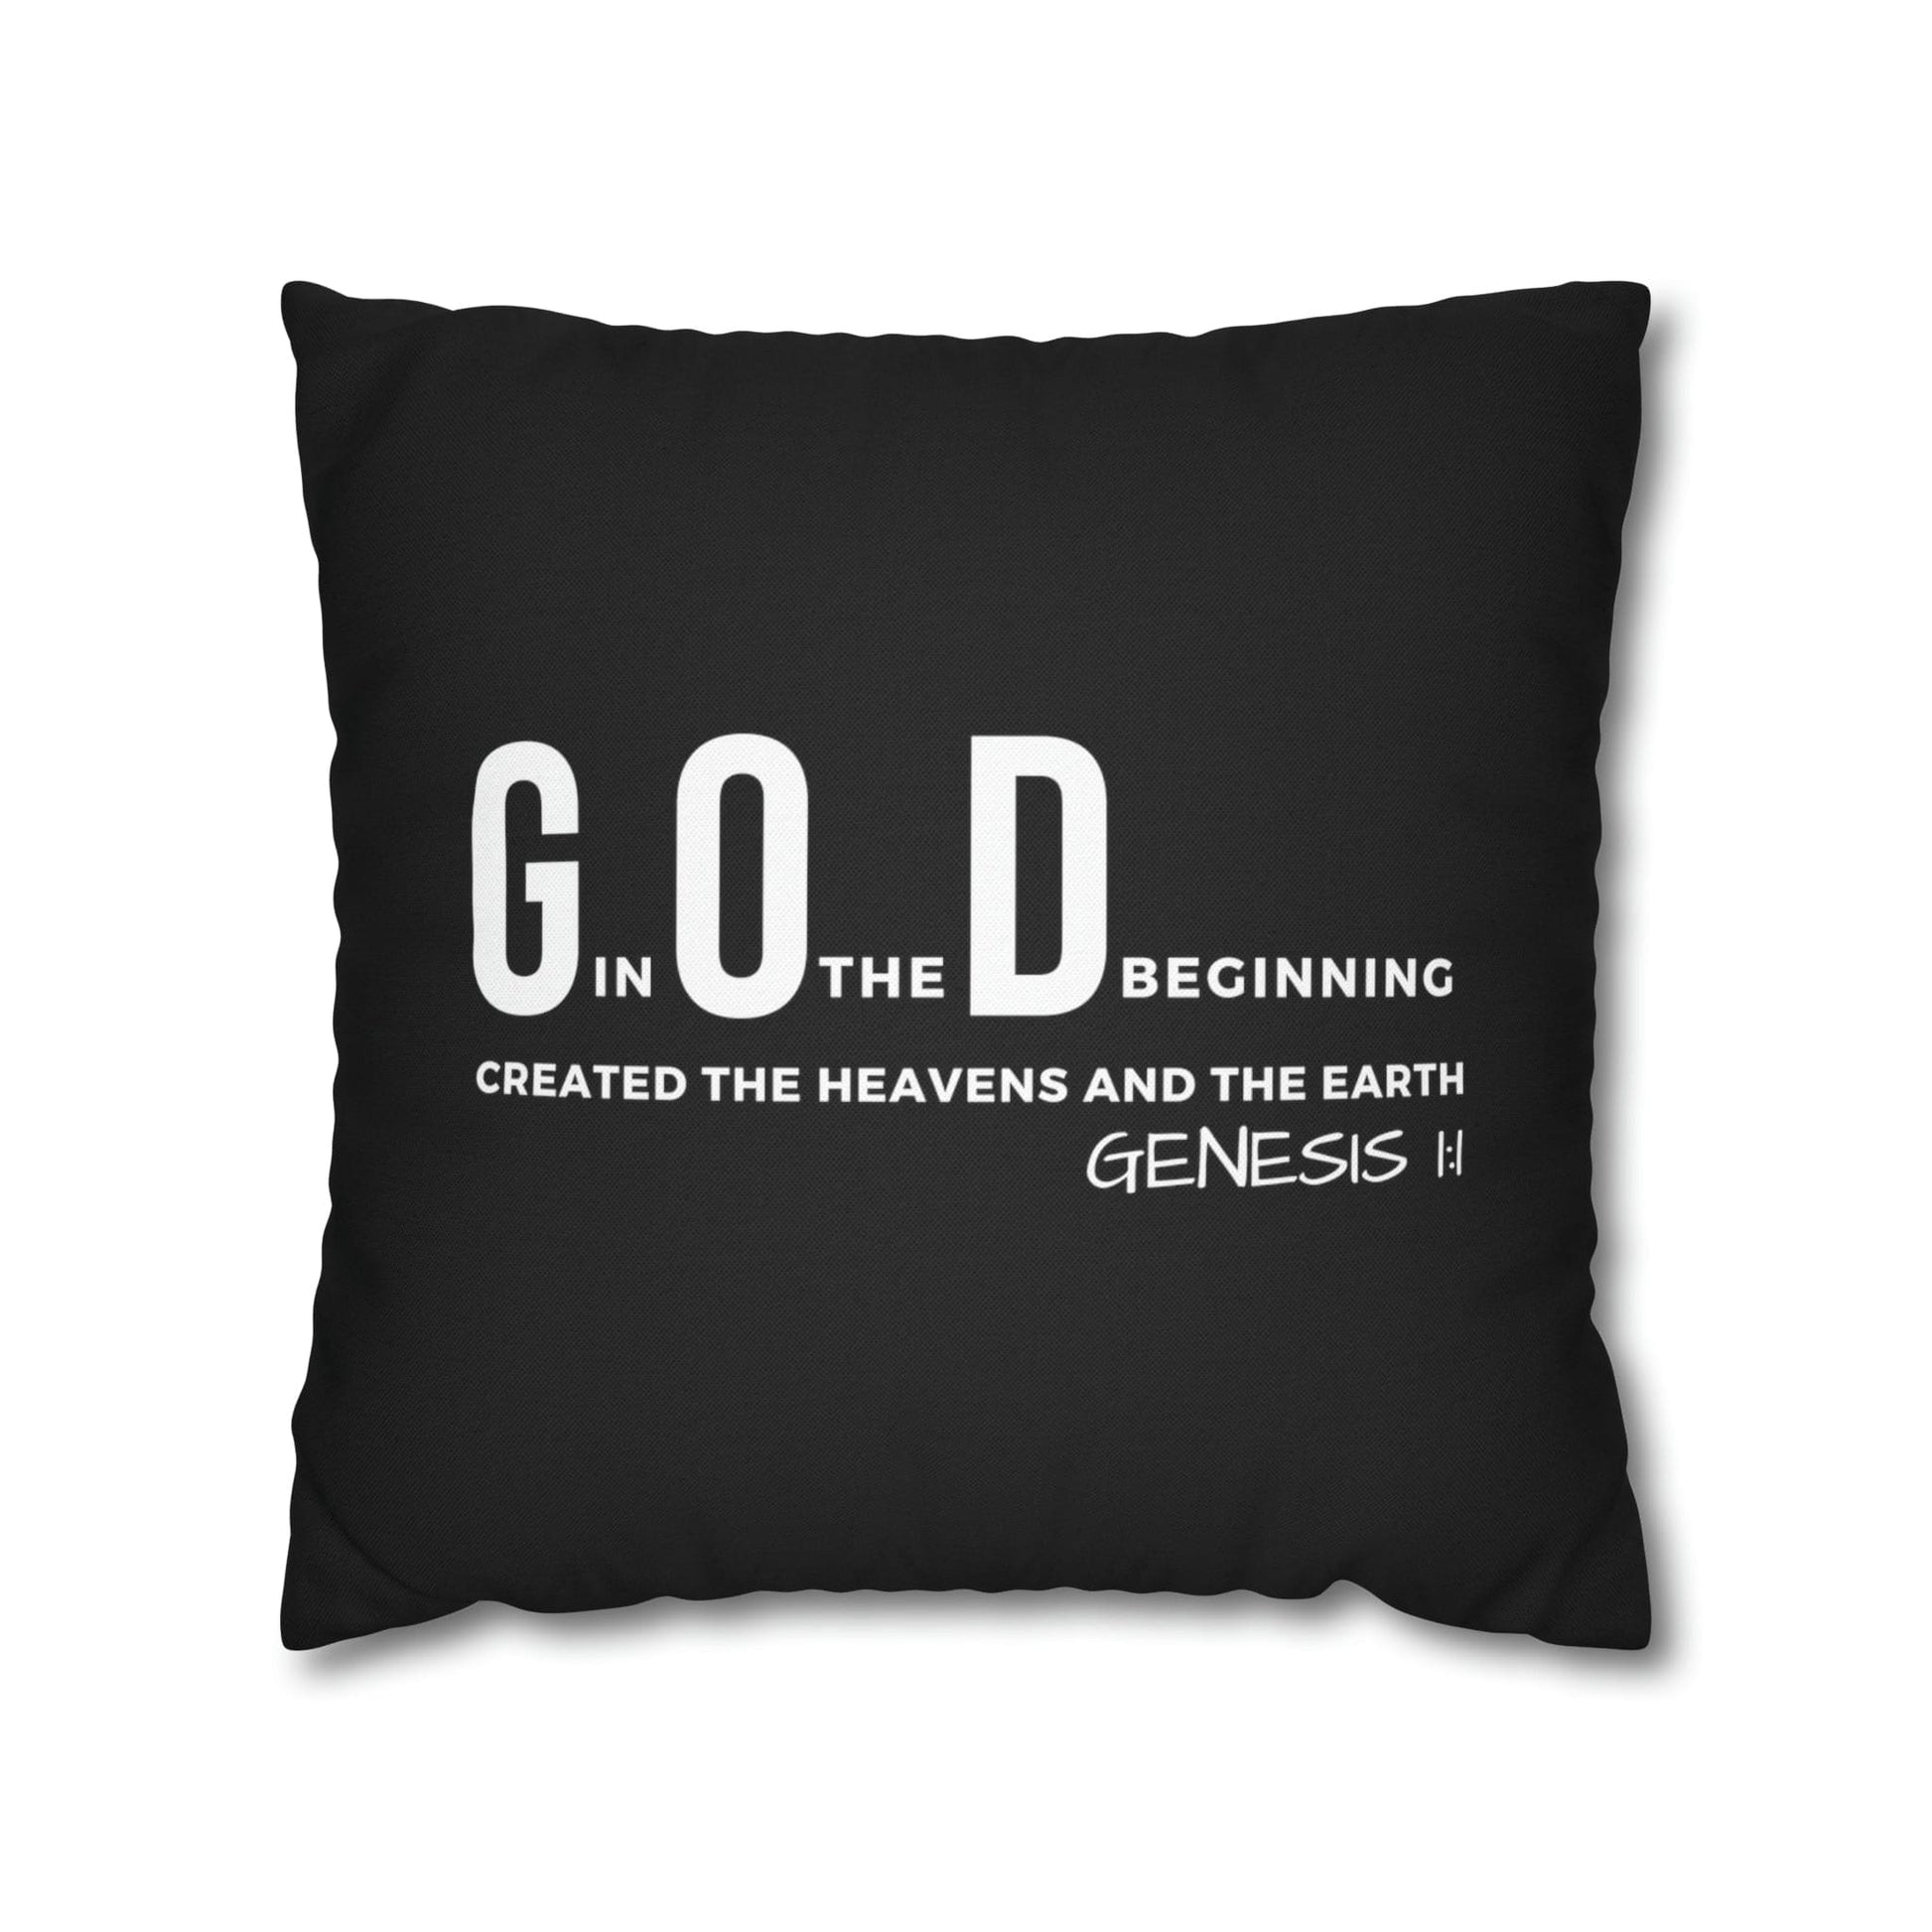 Decorative Throw Pillow Cover - Set Of 2, God In The Beginning Created The Heavens And The Earth - Scripture Verse-3